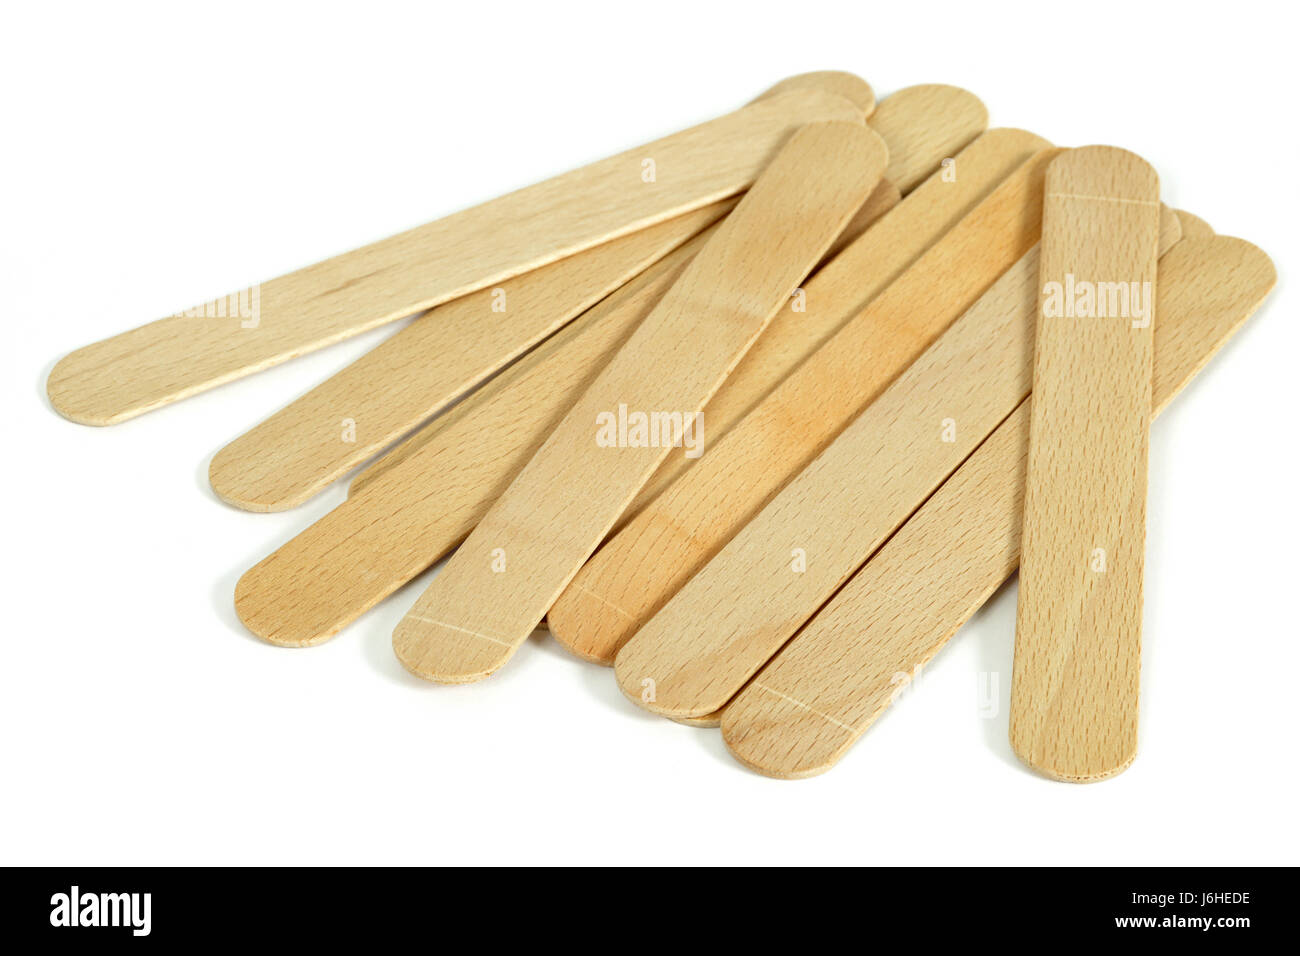 Human mouth with wooden tongue depressor Vector Image